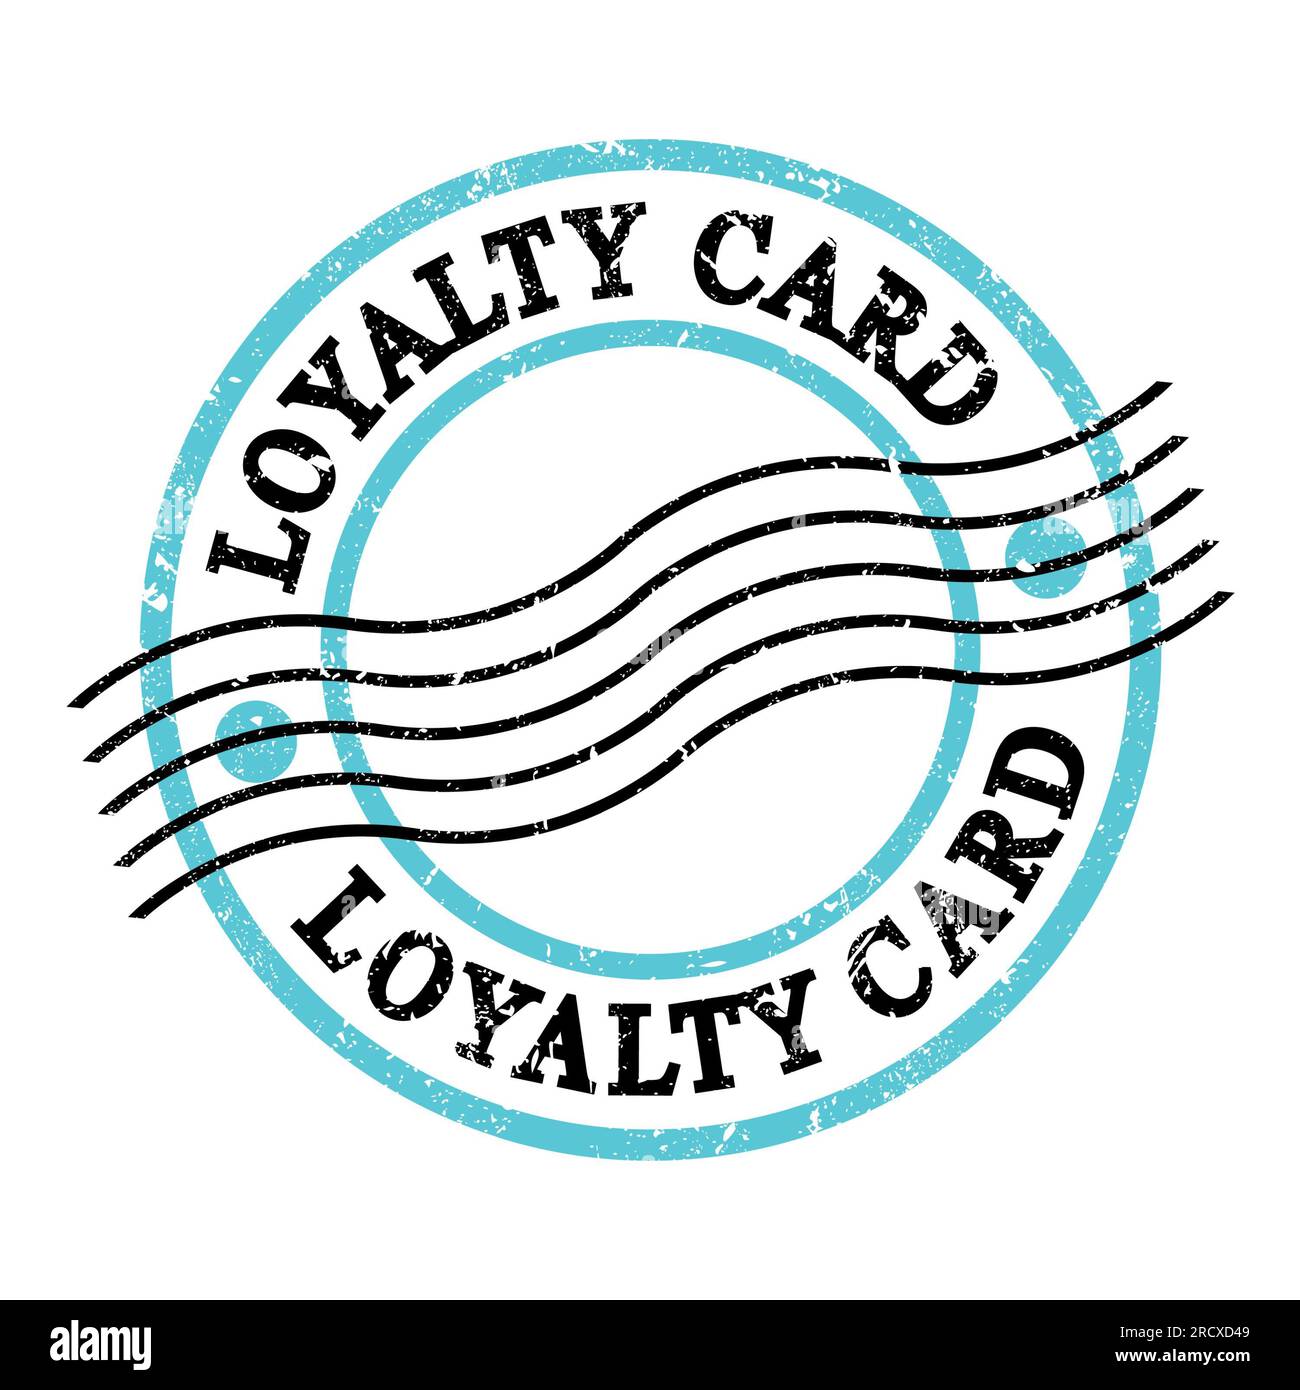 Circle Stamps, loyalty card stamps